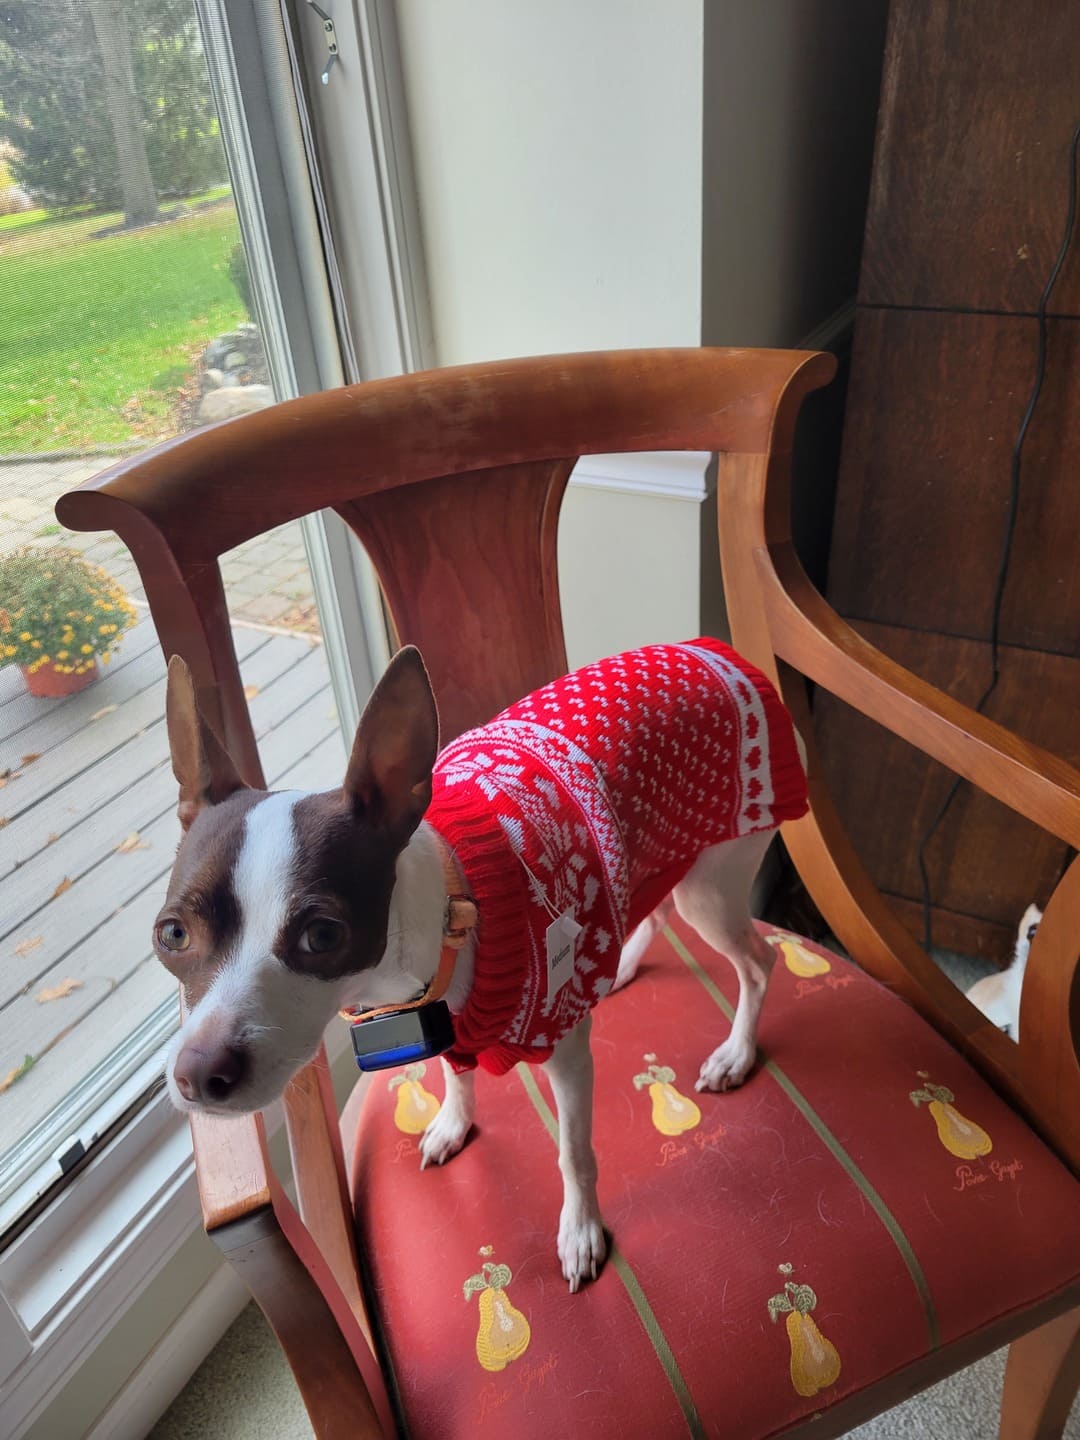 Guinevere Red Hearts and Snowflakes Dog Sweater